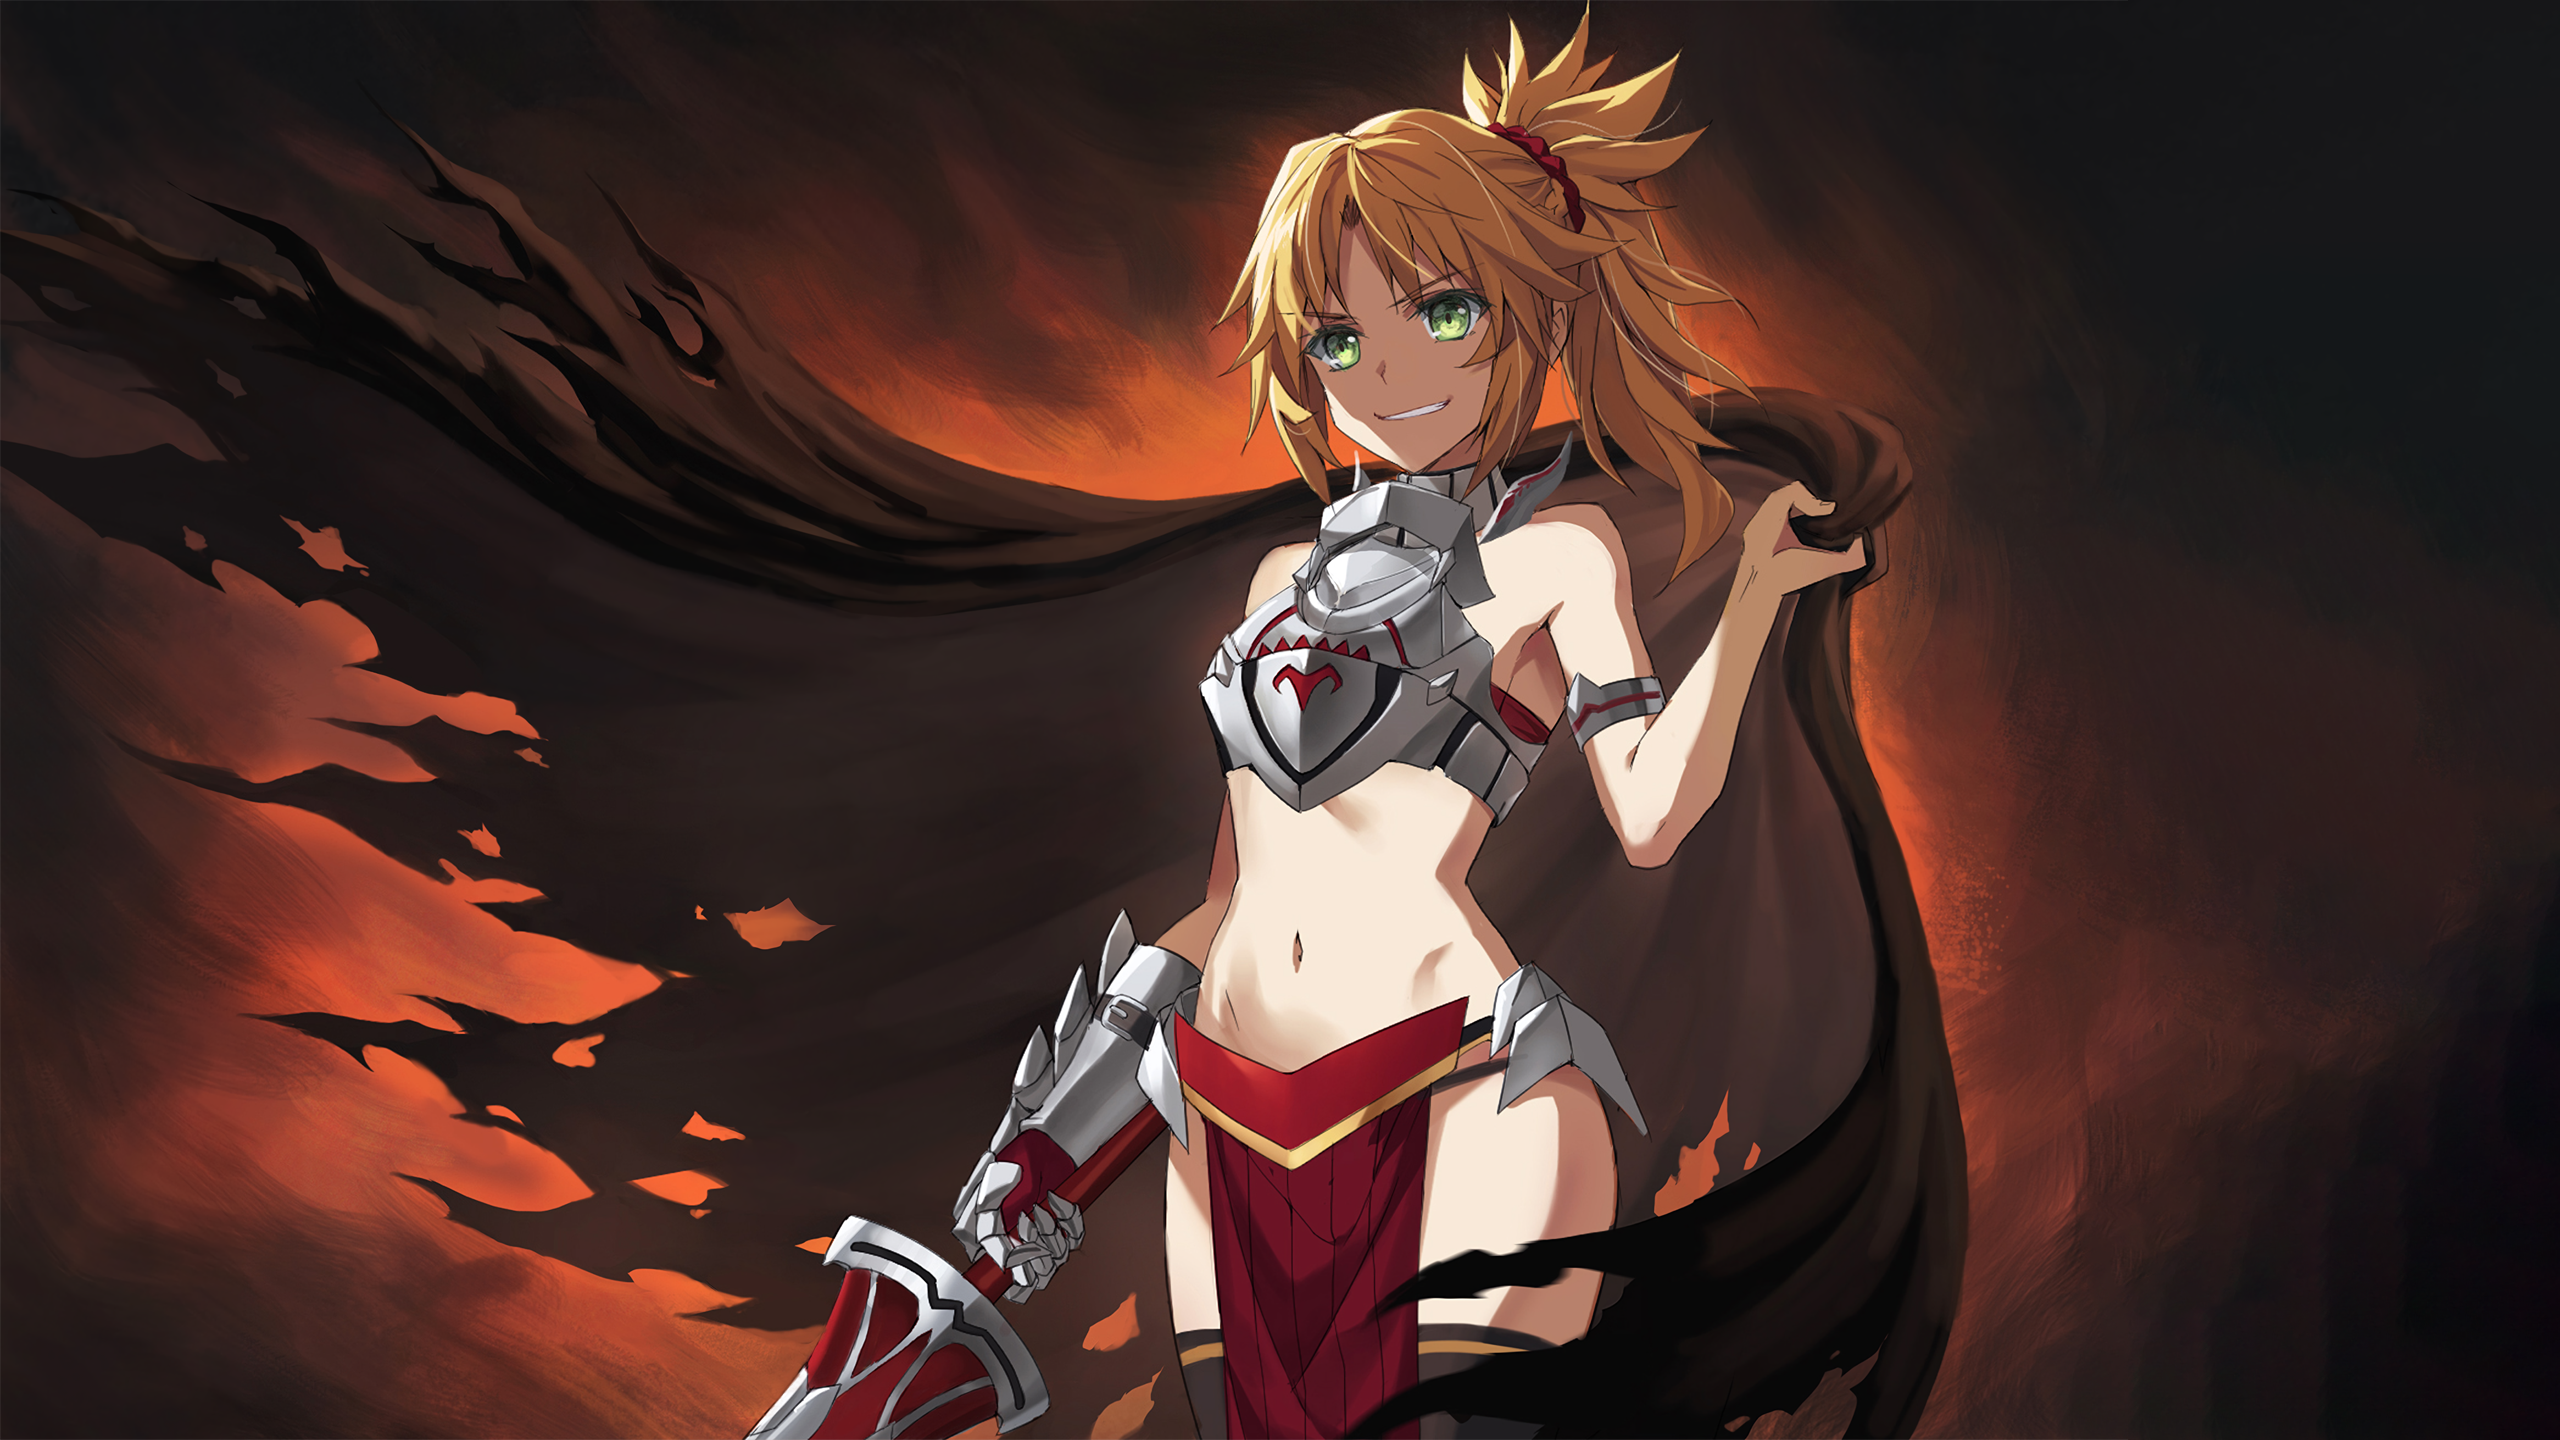 Anime 2560x1440 anime anime girls Fate series Fate/Apocrypha  Mordred (Fate/Apocrypha) blonde belly thighs thigh-highs stockings black legwear cape ponytail sword knight Tonee